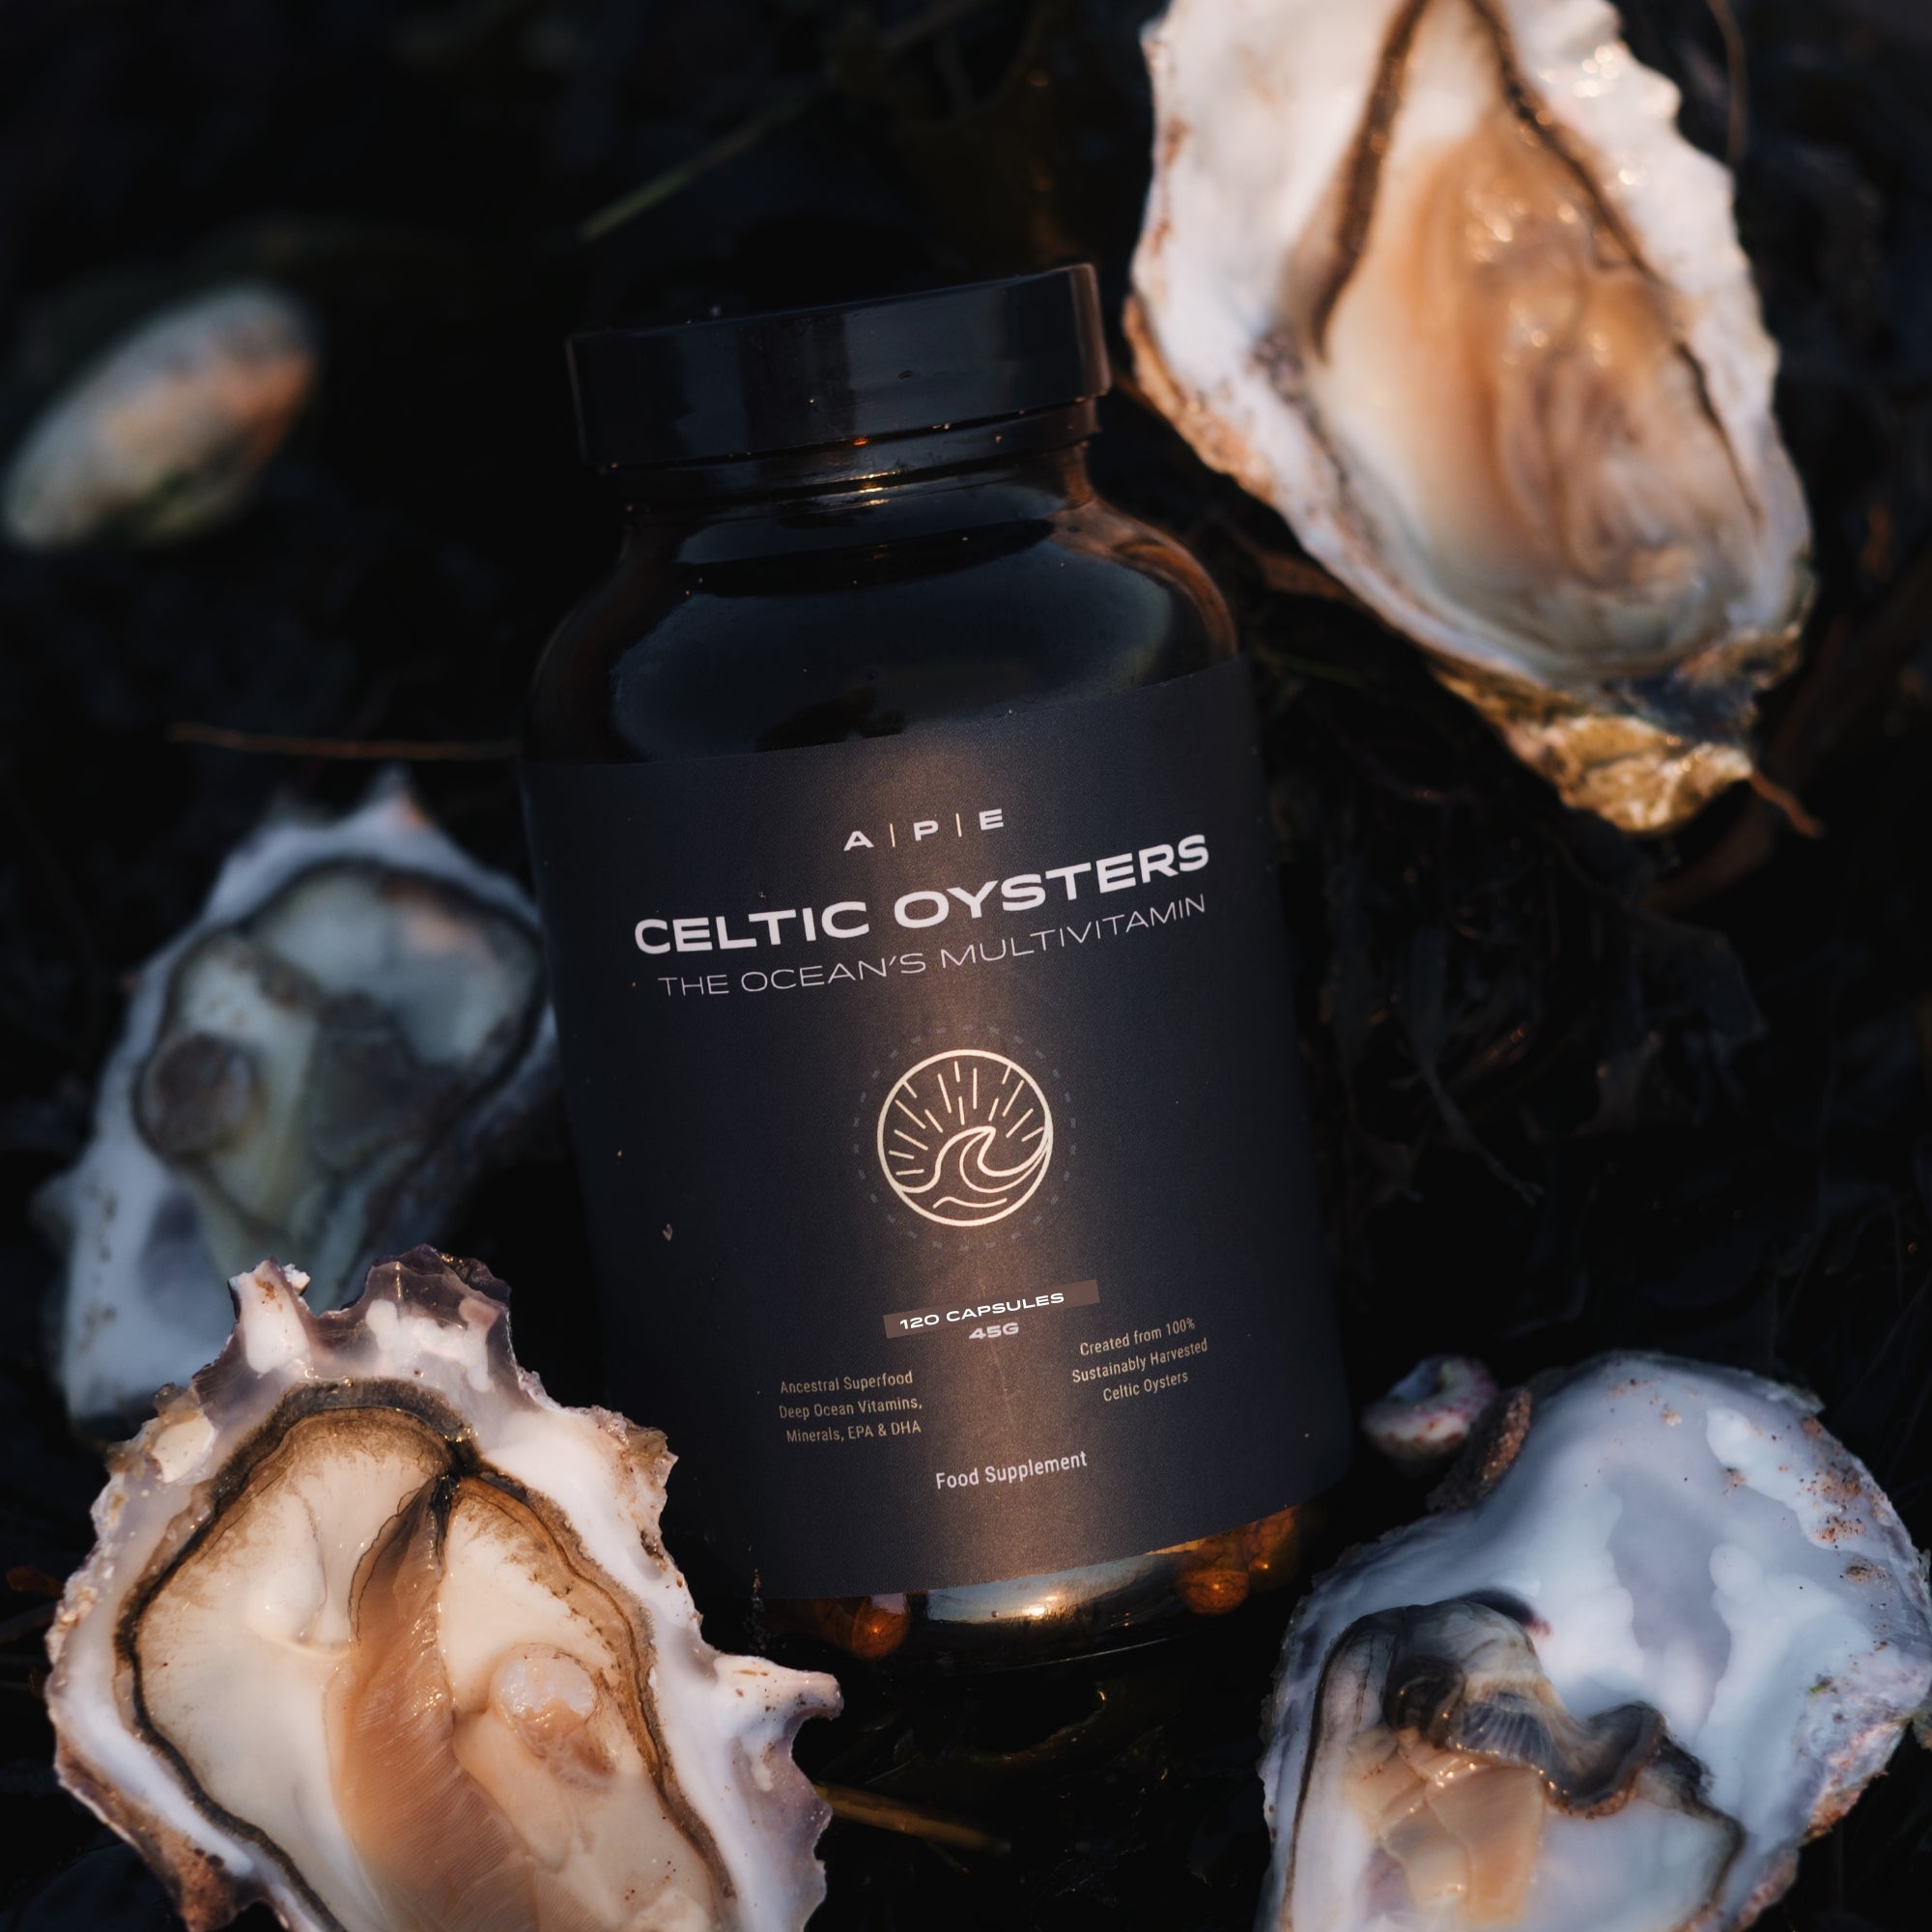 Celtic Oysters